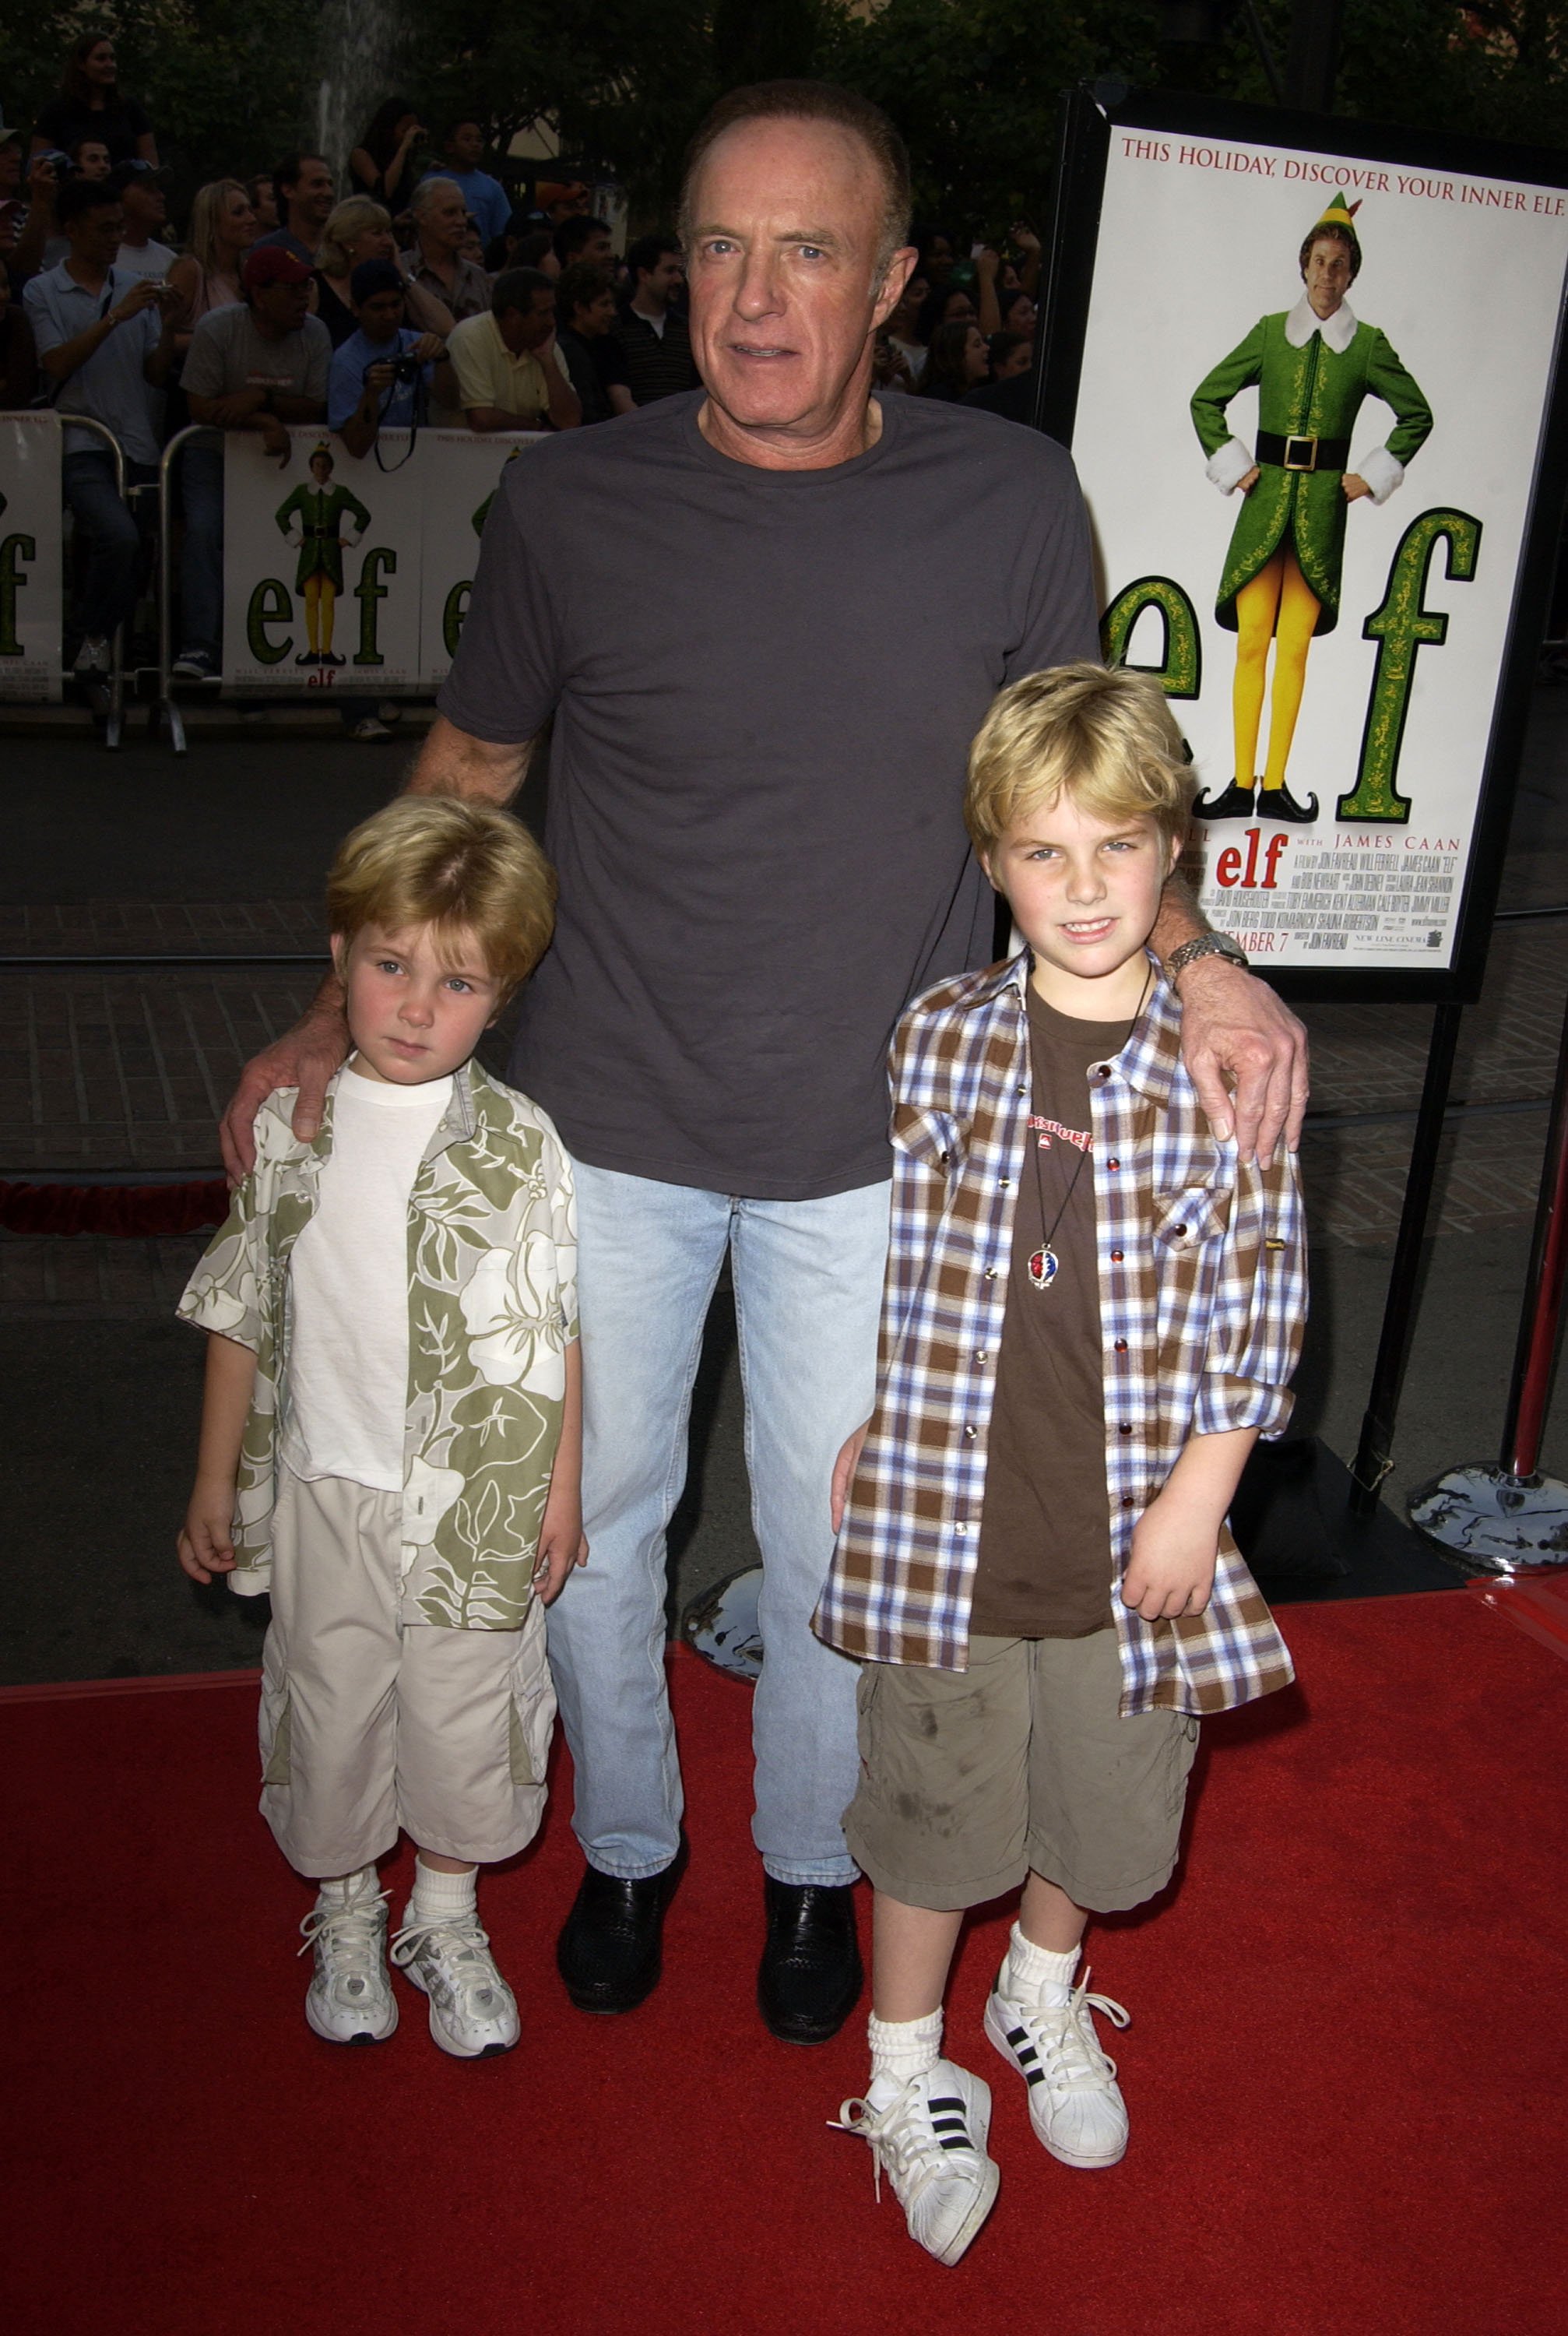 James Caan and sons James Jr. and Jake during "Elf" special screening at The Grove Theater in Los Angeles, California. / Source: Getty Images